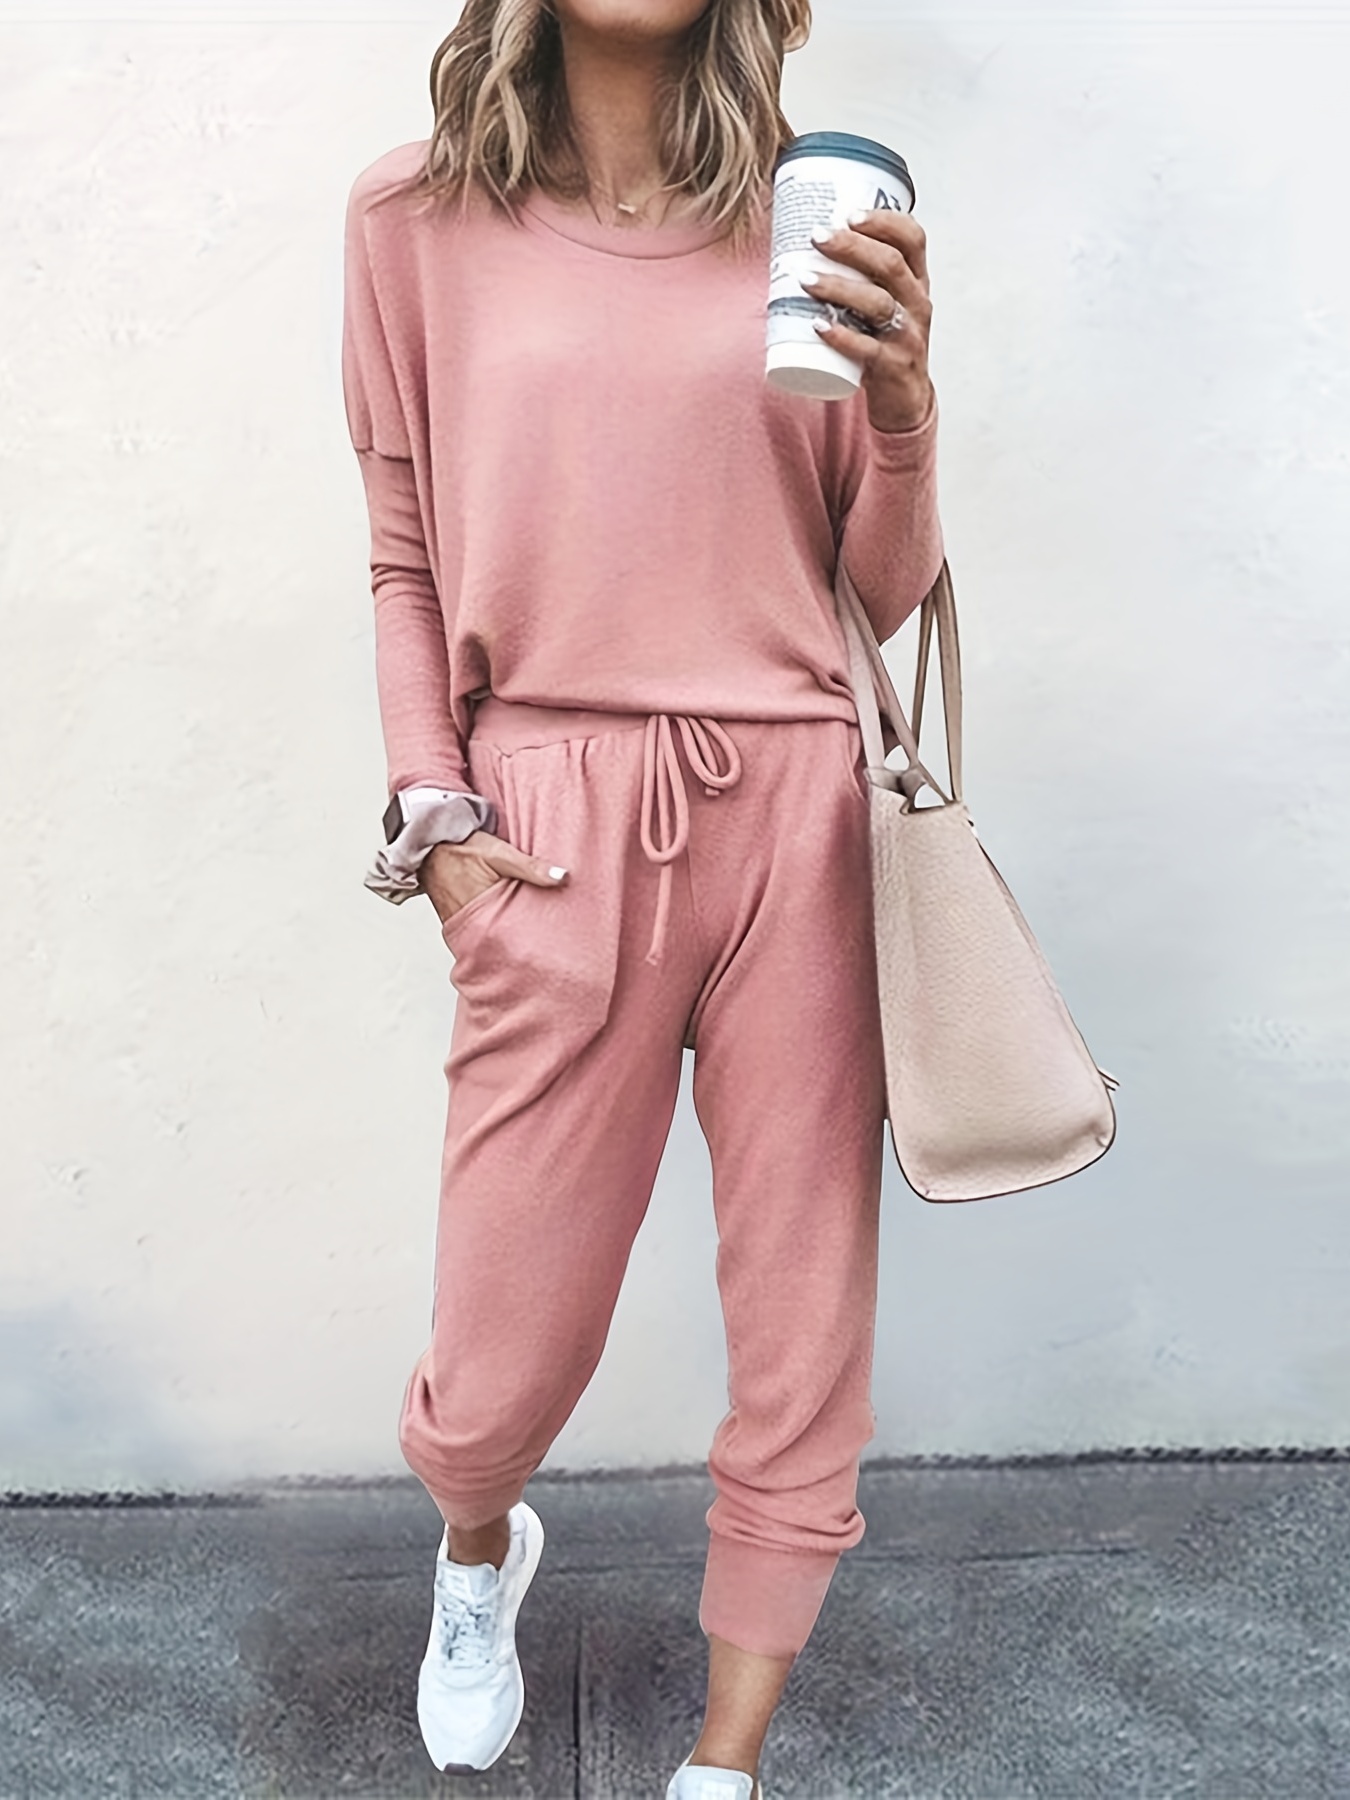 White Long Sleeve T-shirt with Hot Pink Pants Outfits For Women (5 ideas &  outfits)